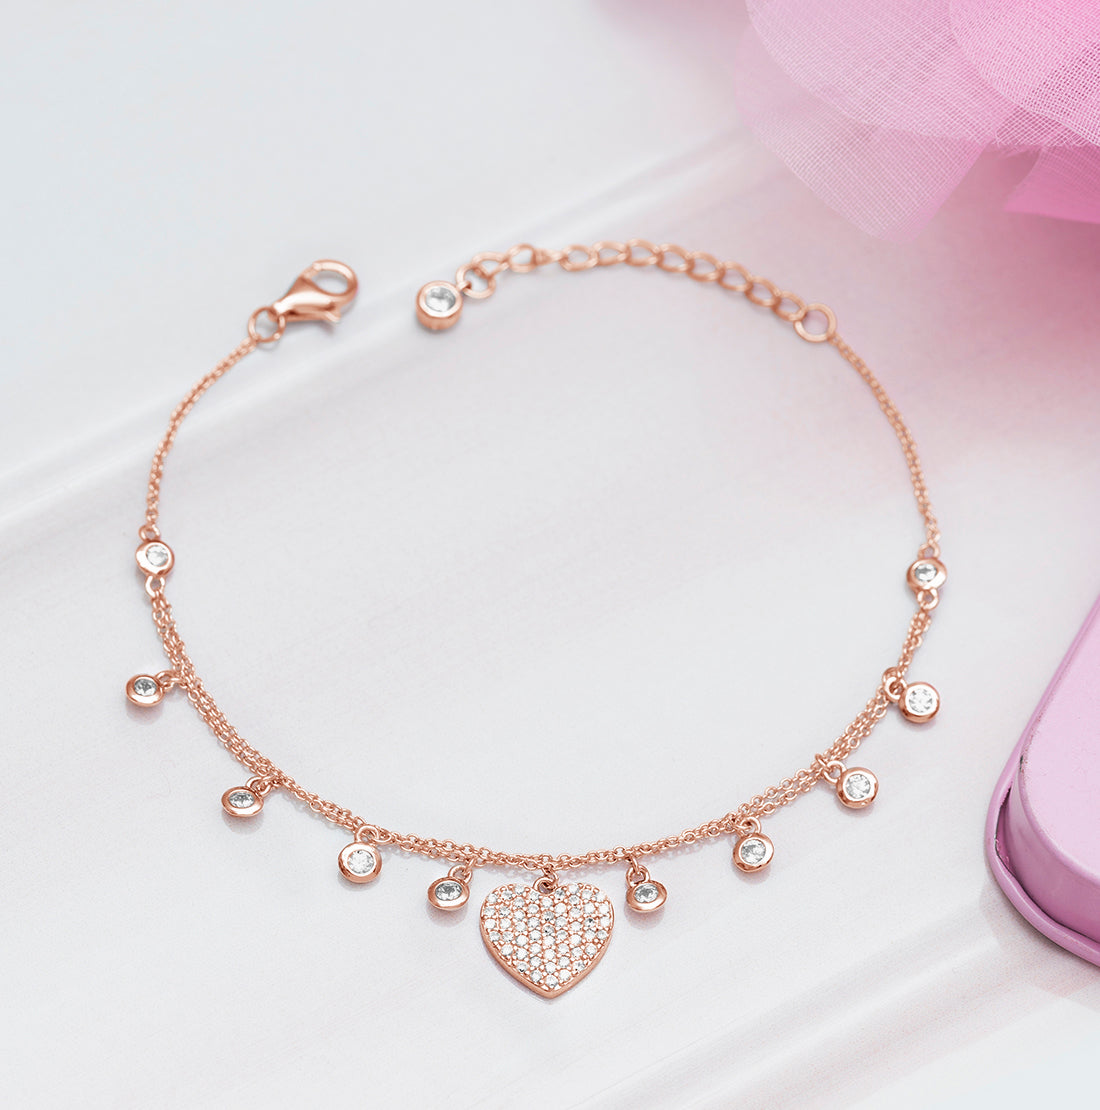 Truly Captivating Heart Charms 925 Silver Bracelet in Rose Gold